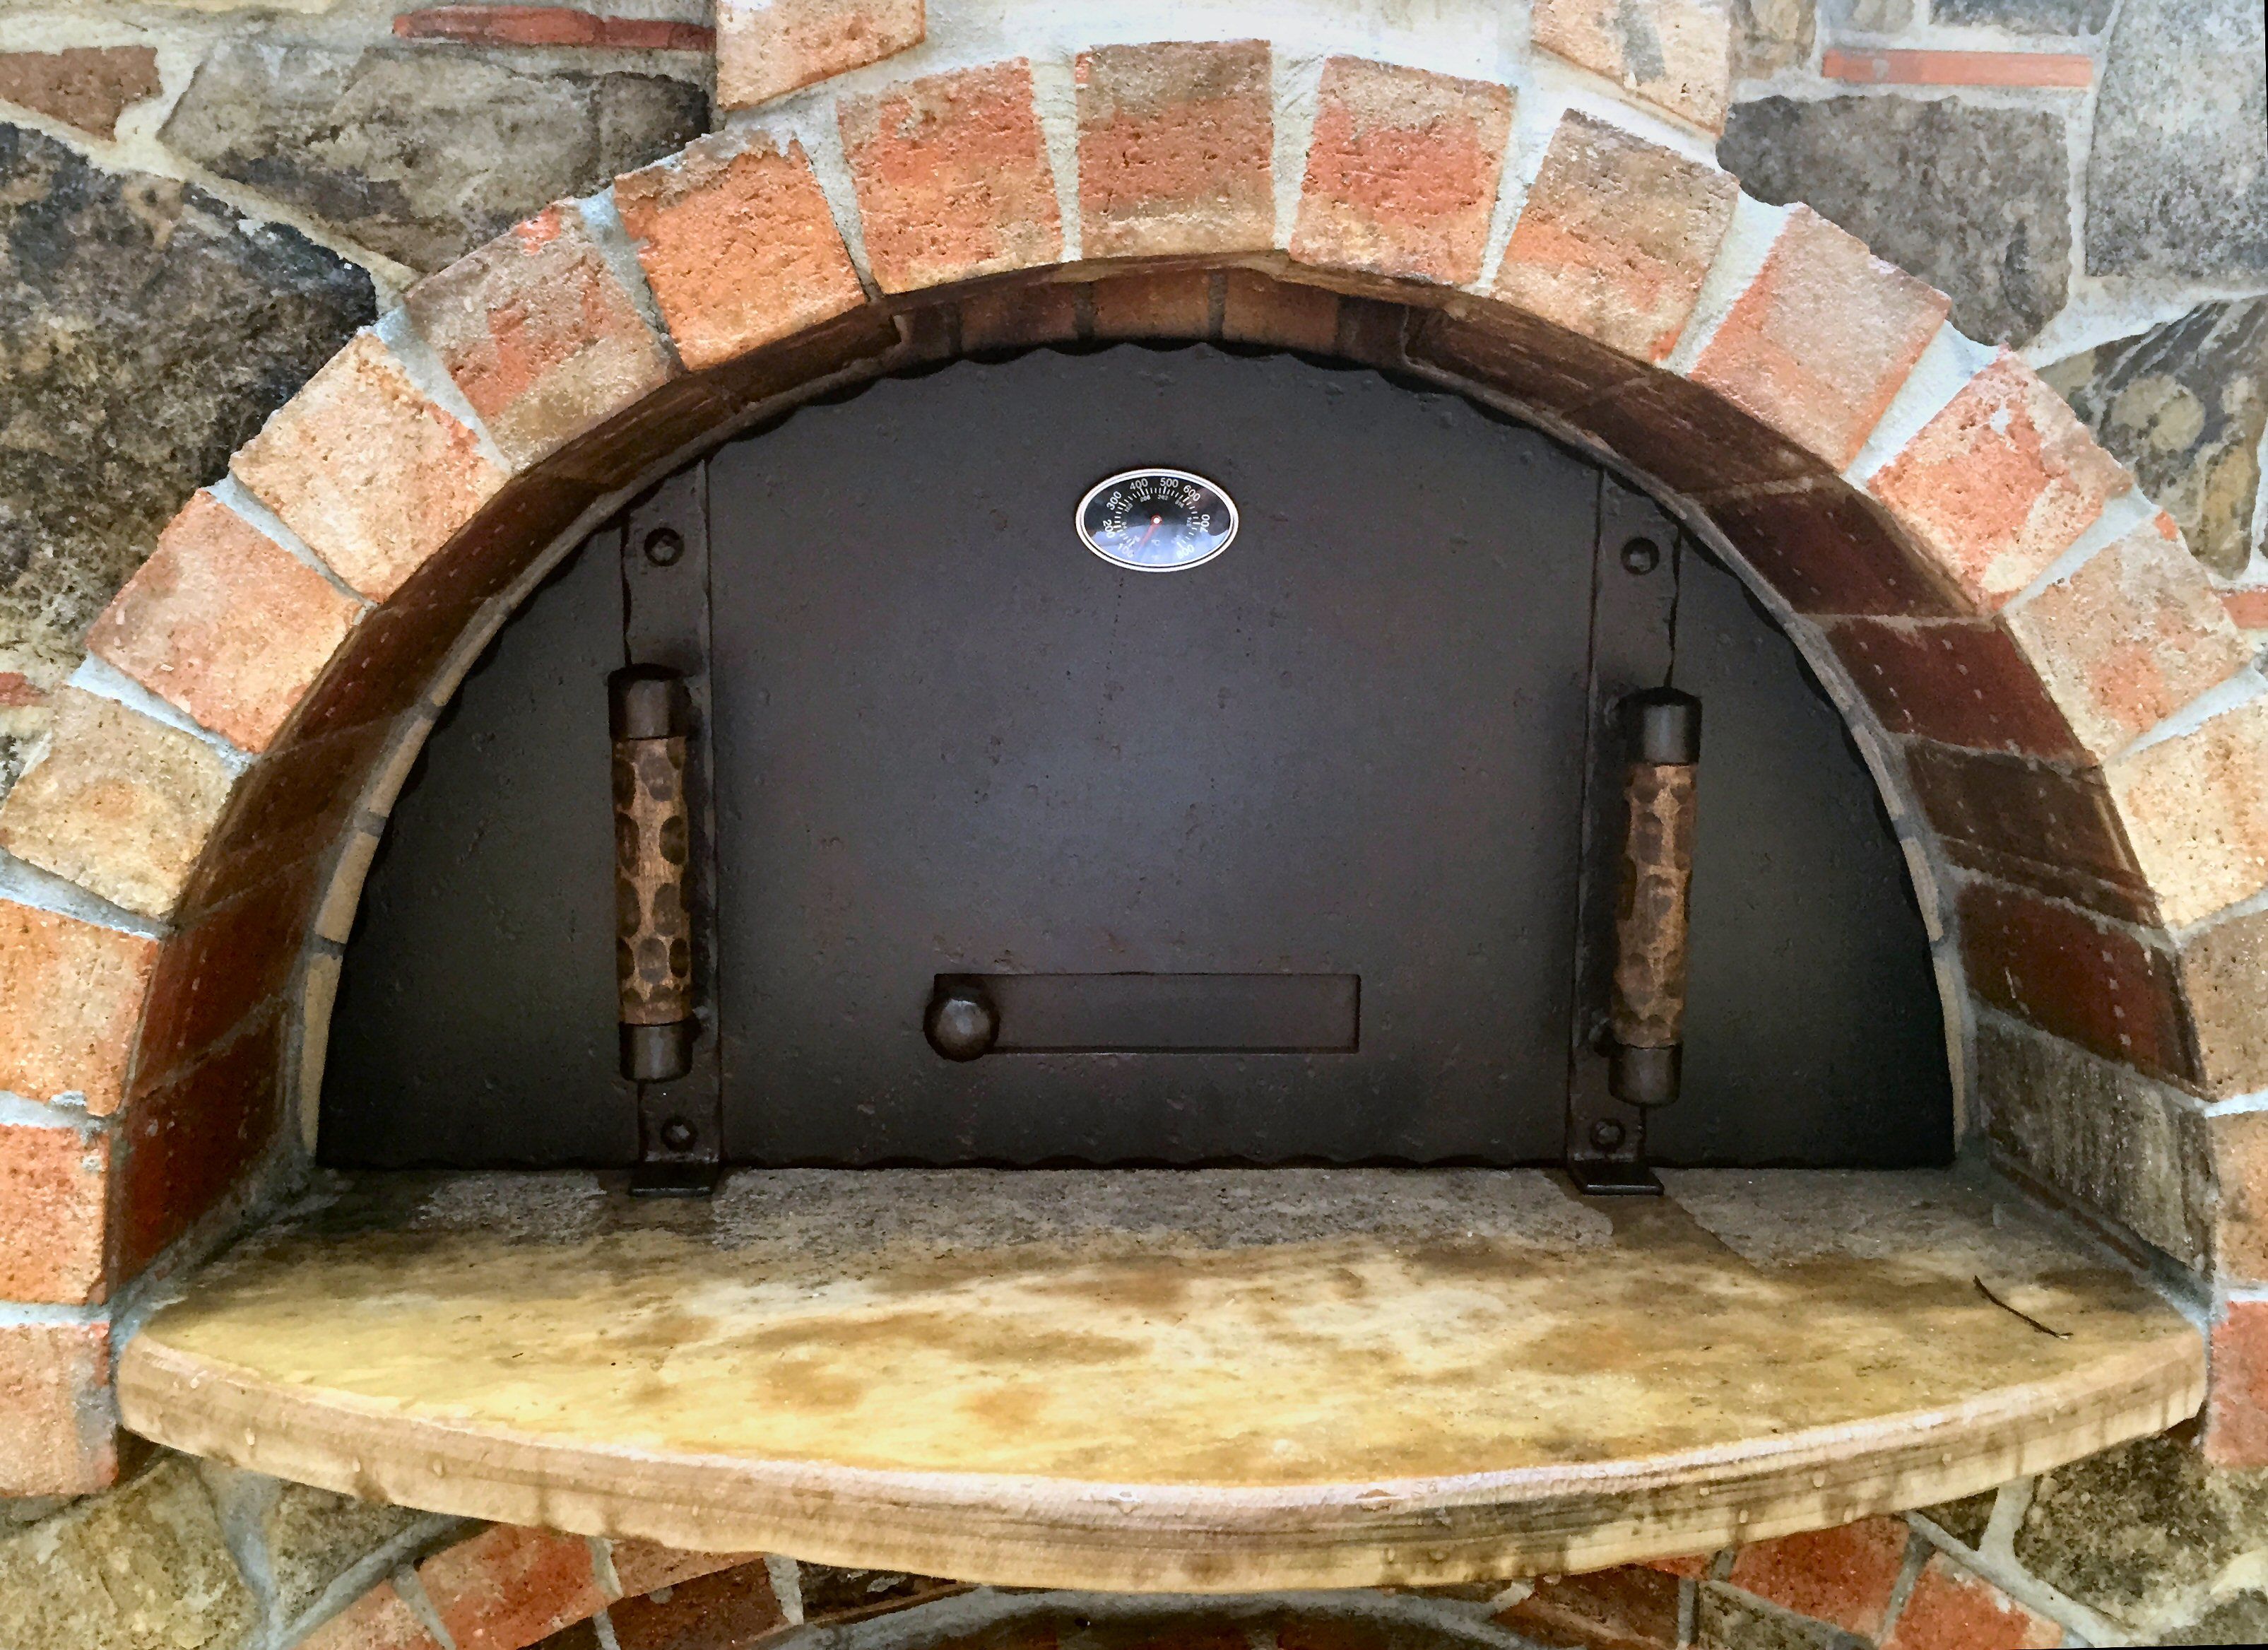 Pizza Oven Fireplace Luxury Md 208 Full Radius Pizza Oven Door with A Damper